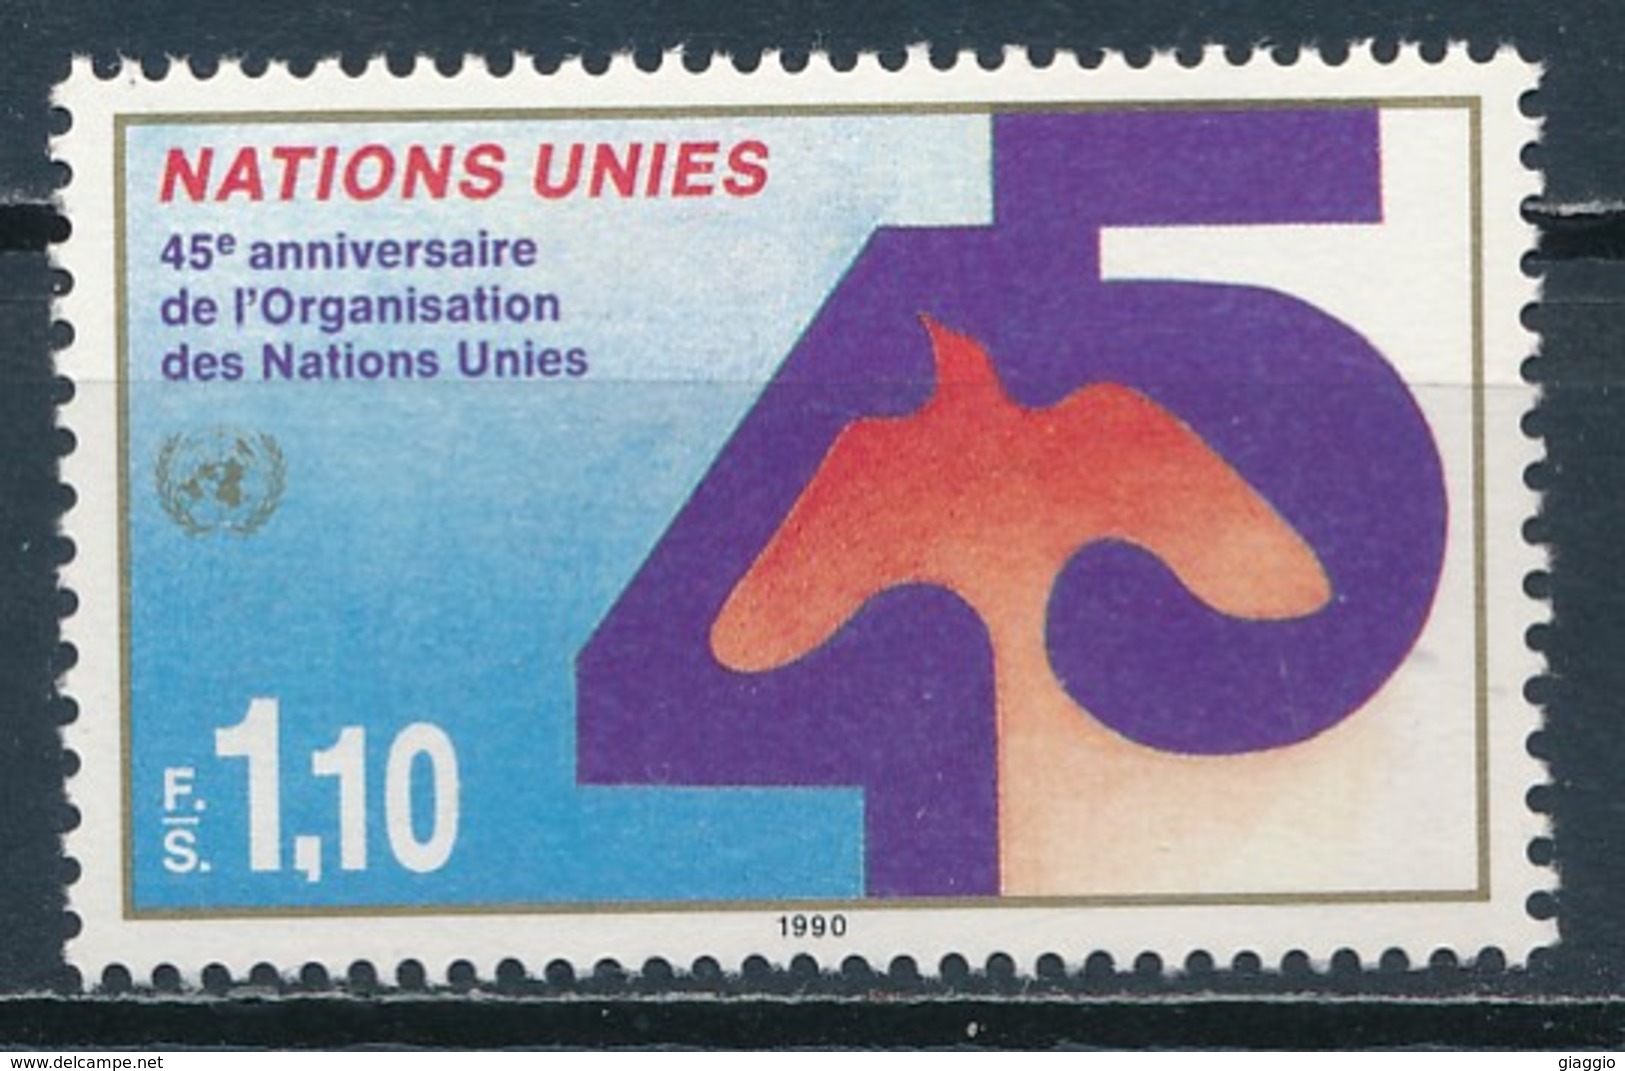 °°° NATIONS UNIES UNITED NATIONS - Y&T N°192 - 1990 MNH °°° - Nuovi